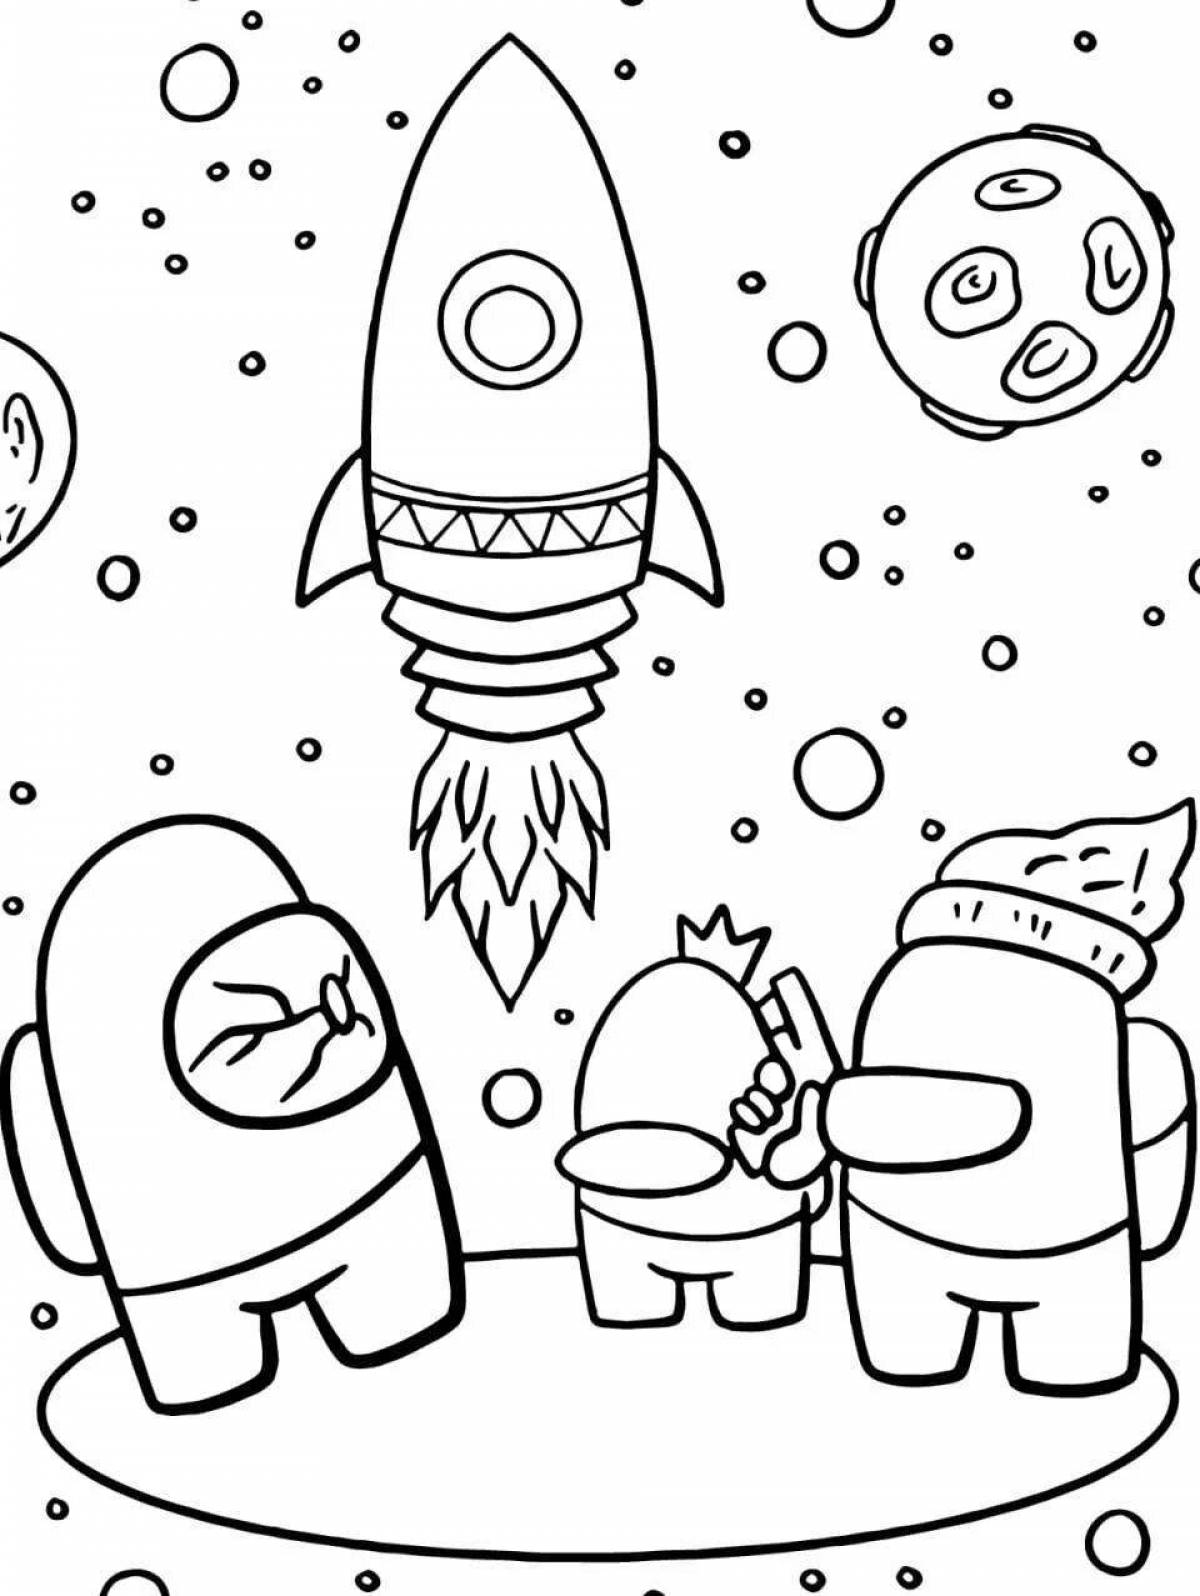 Adorable space coloring game